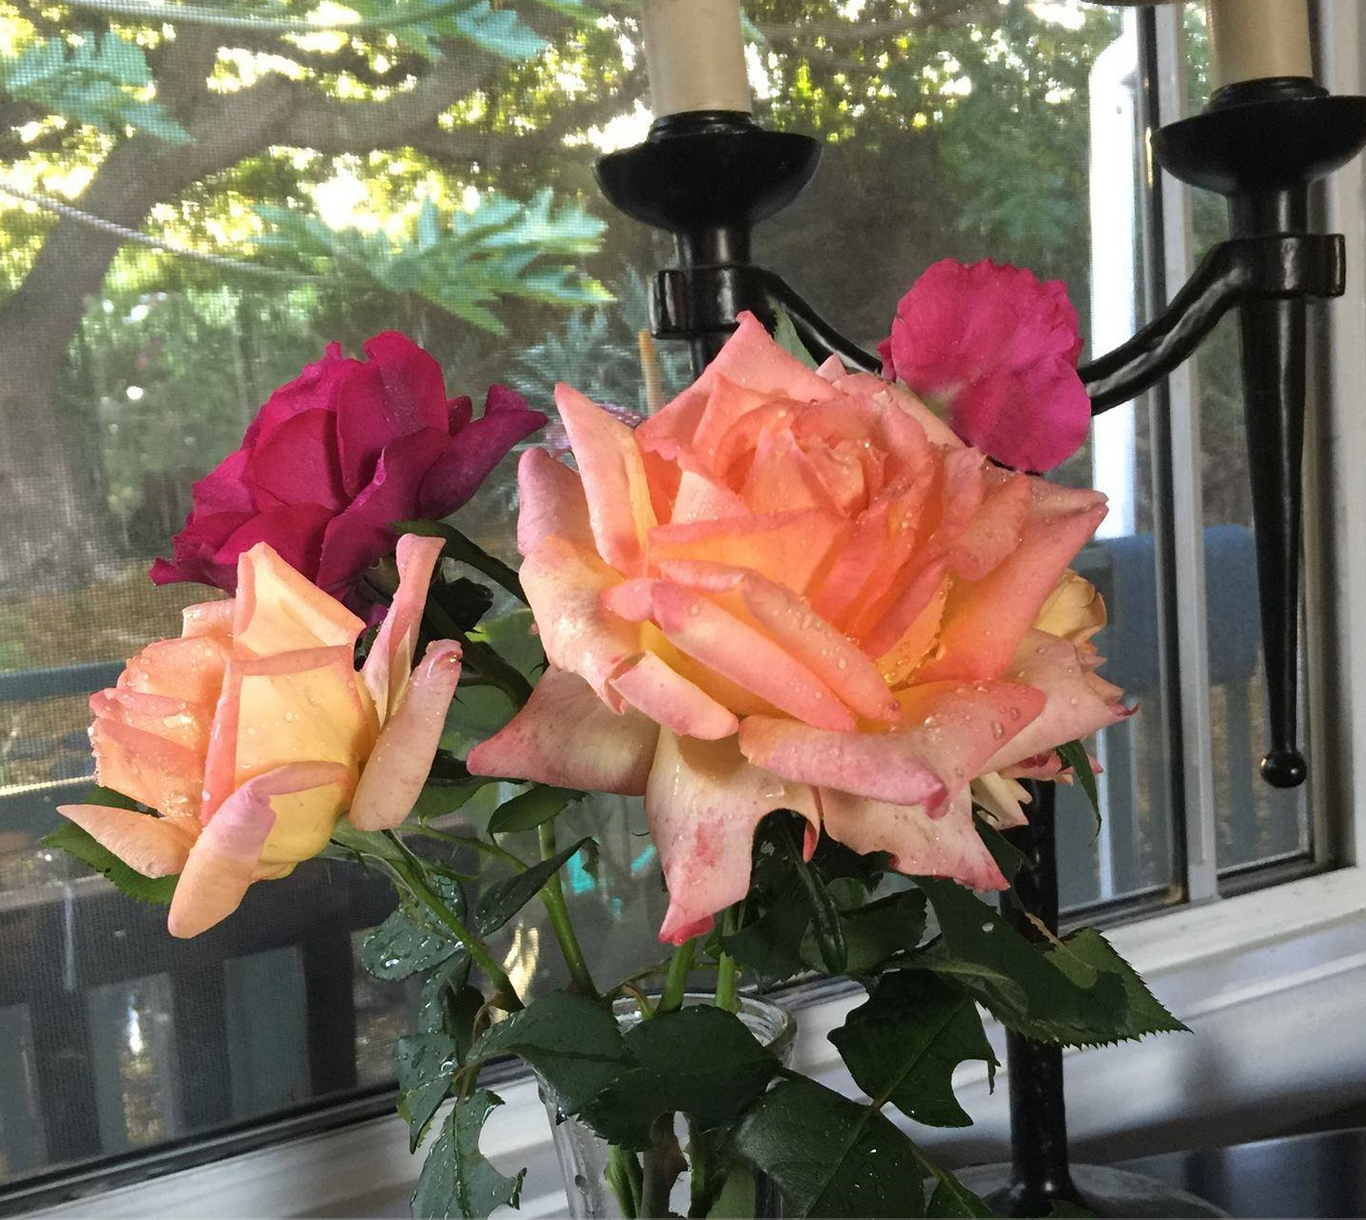 Potted Rose Bushes ~ The Barbara Jean Special